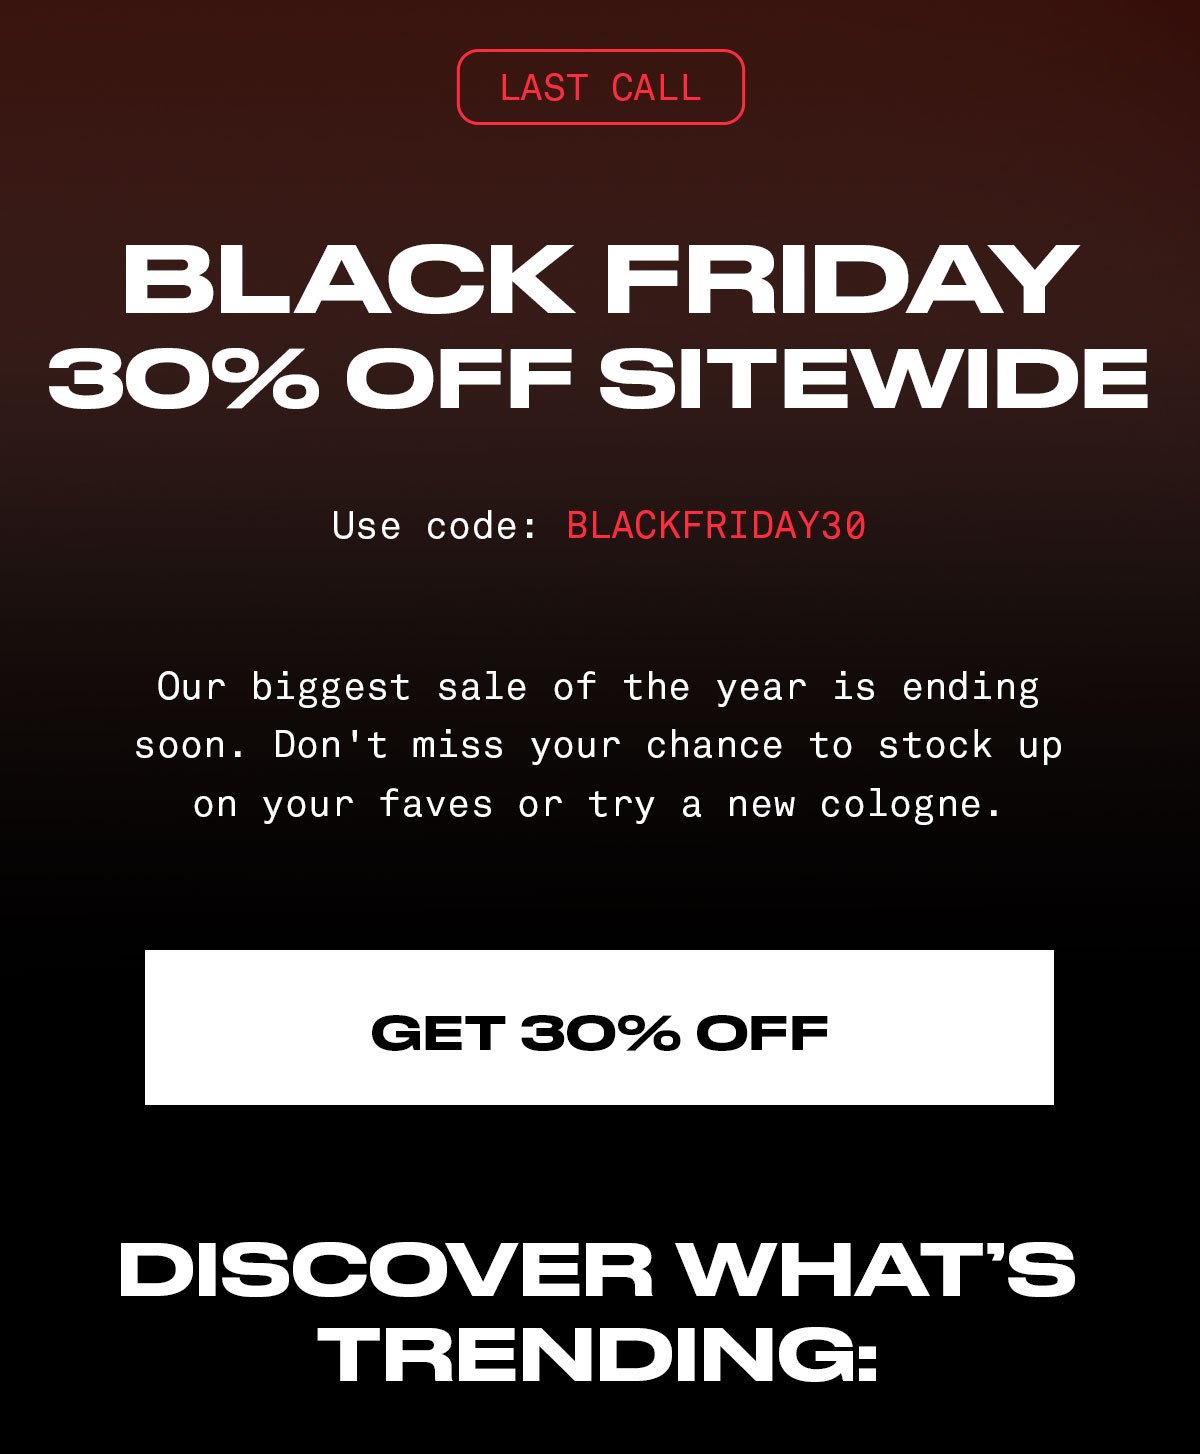 BLACK FRIDAY SALE 30% Off Sitewide CODE: BLACKFRIDAY30 Our biggest sale of the year is ending soon. Don't miss your chance to stock up on your faves or try a new cologne. GET 30% OFF DISCOVER WHAT'S TRENDING: